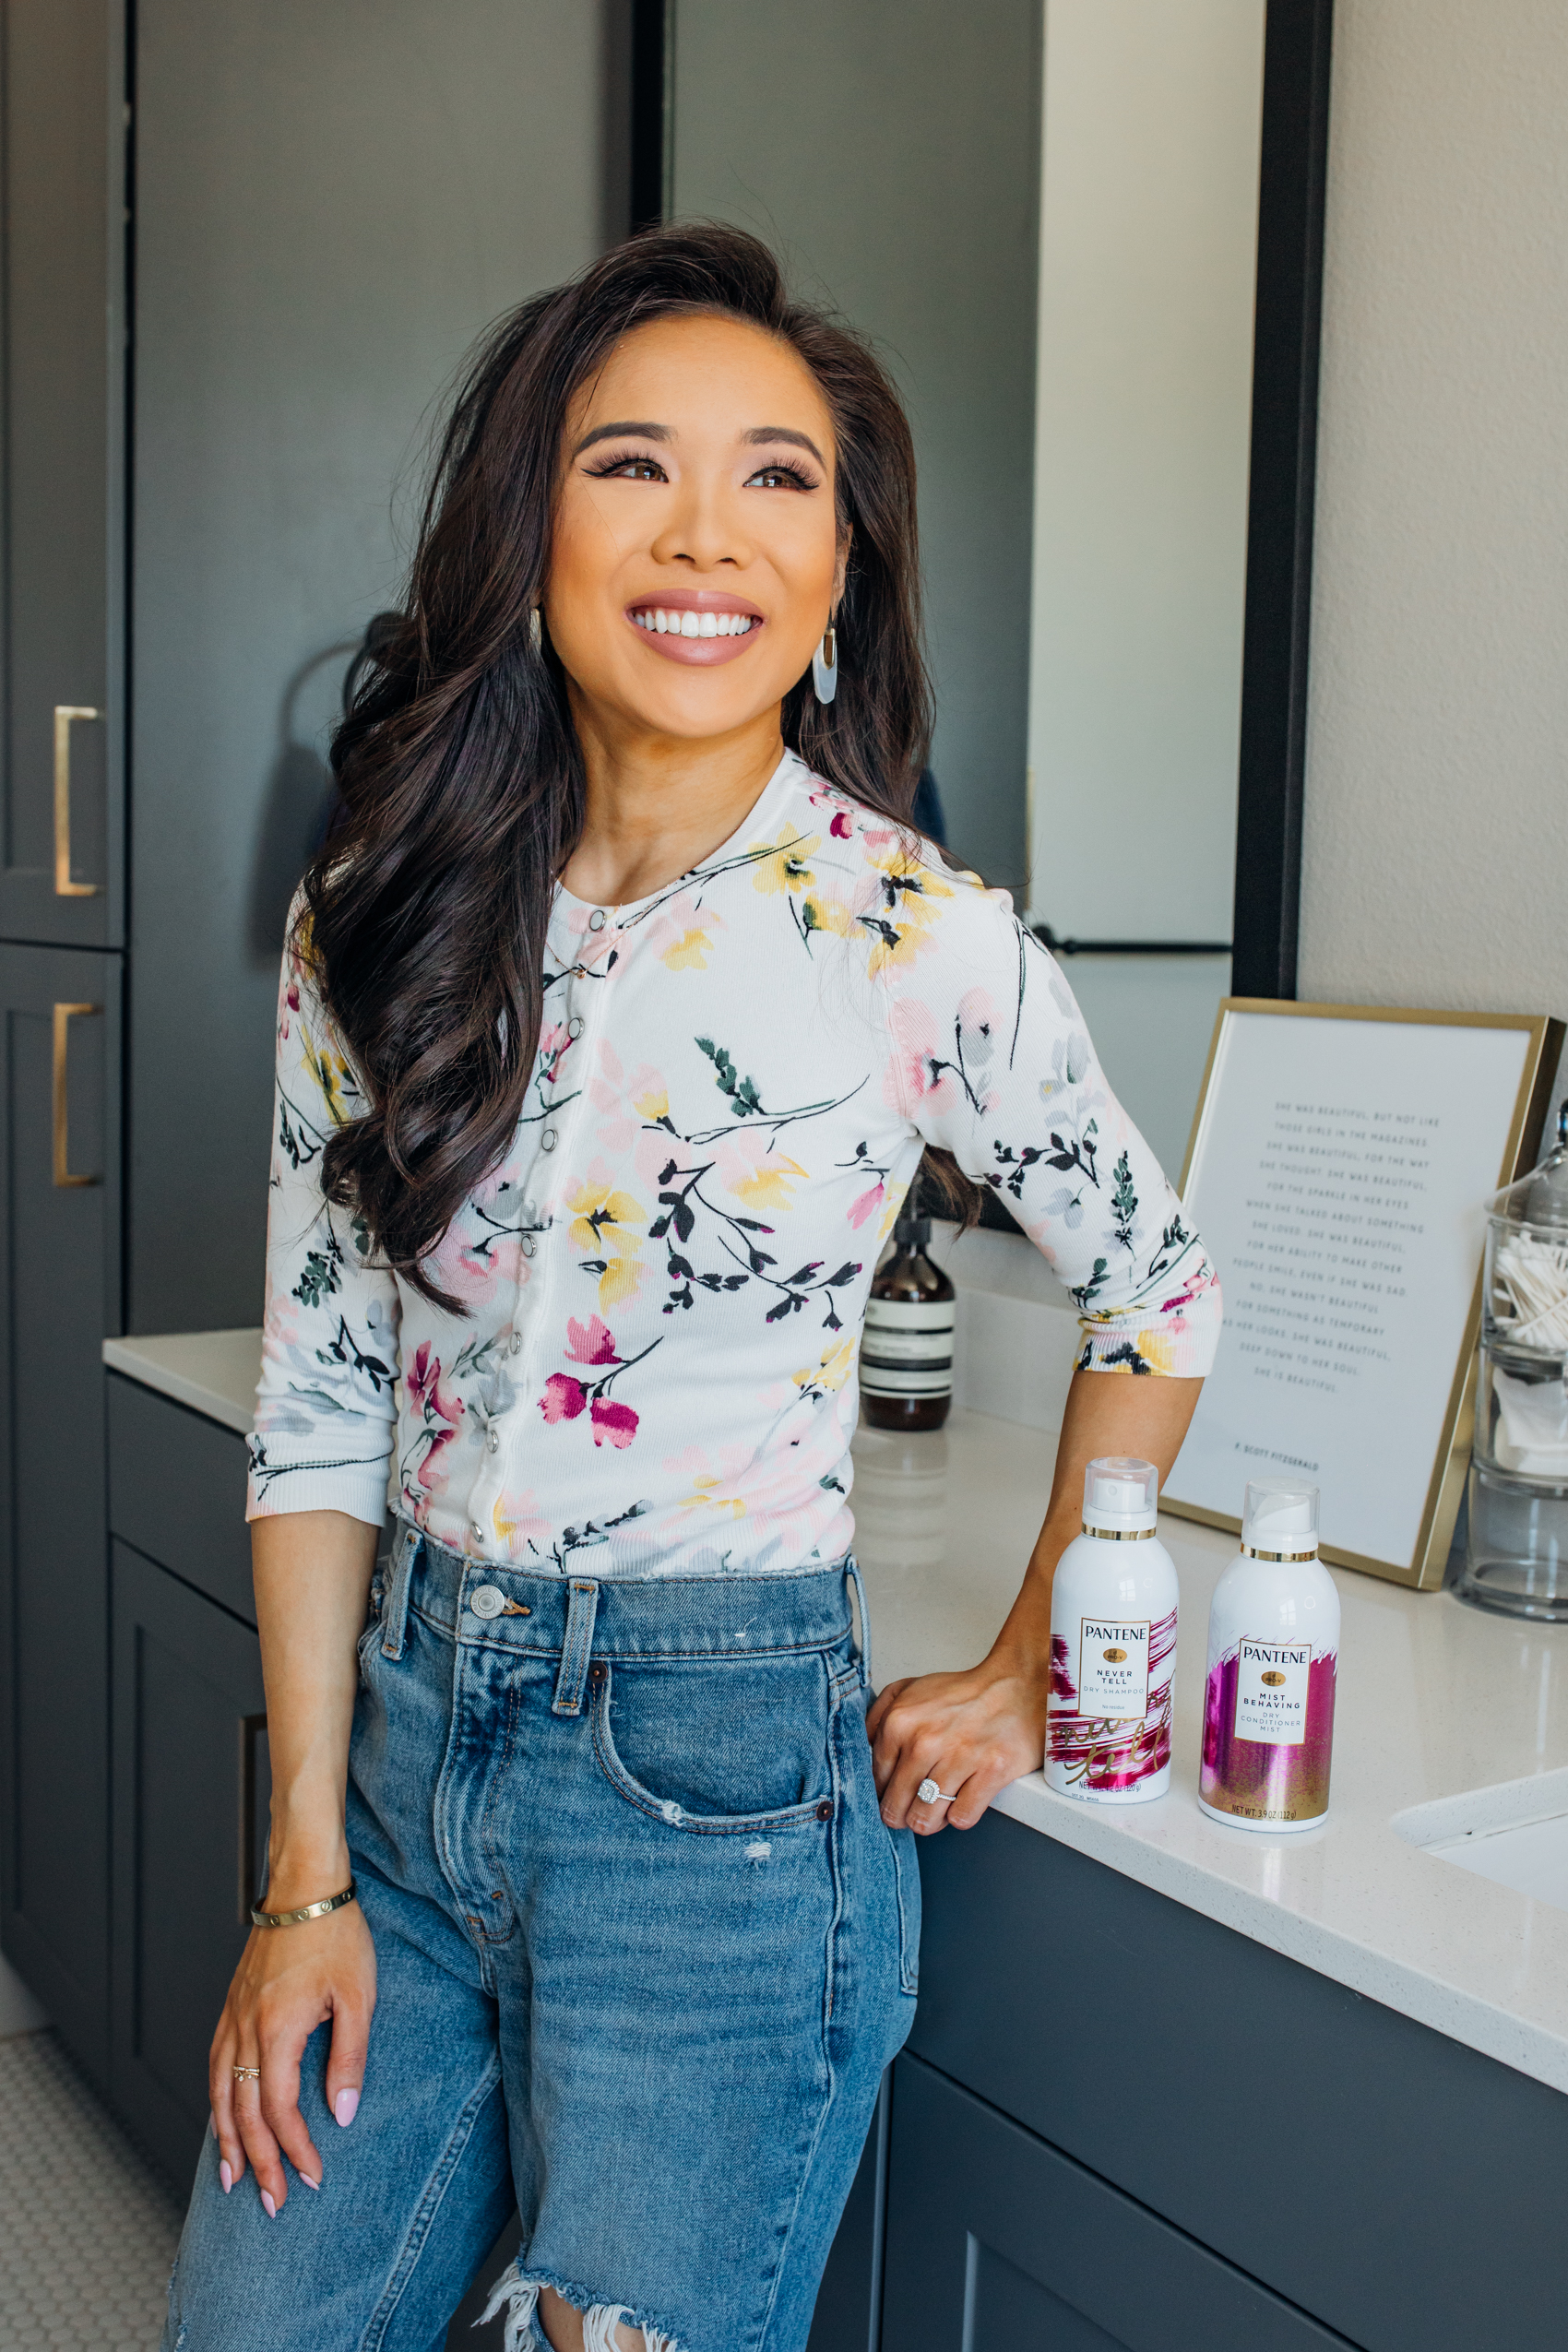 Blogger Hoang-Kim shares her favorite drugstore dry shampoo, Pantene Waterless wearing a floral WHBM Cardigan and mom jeans